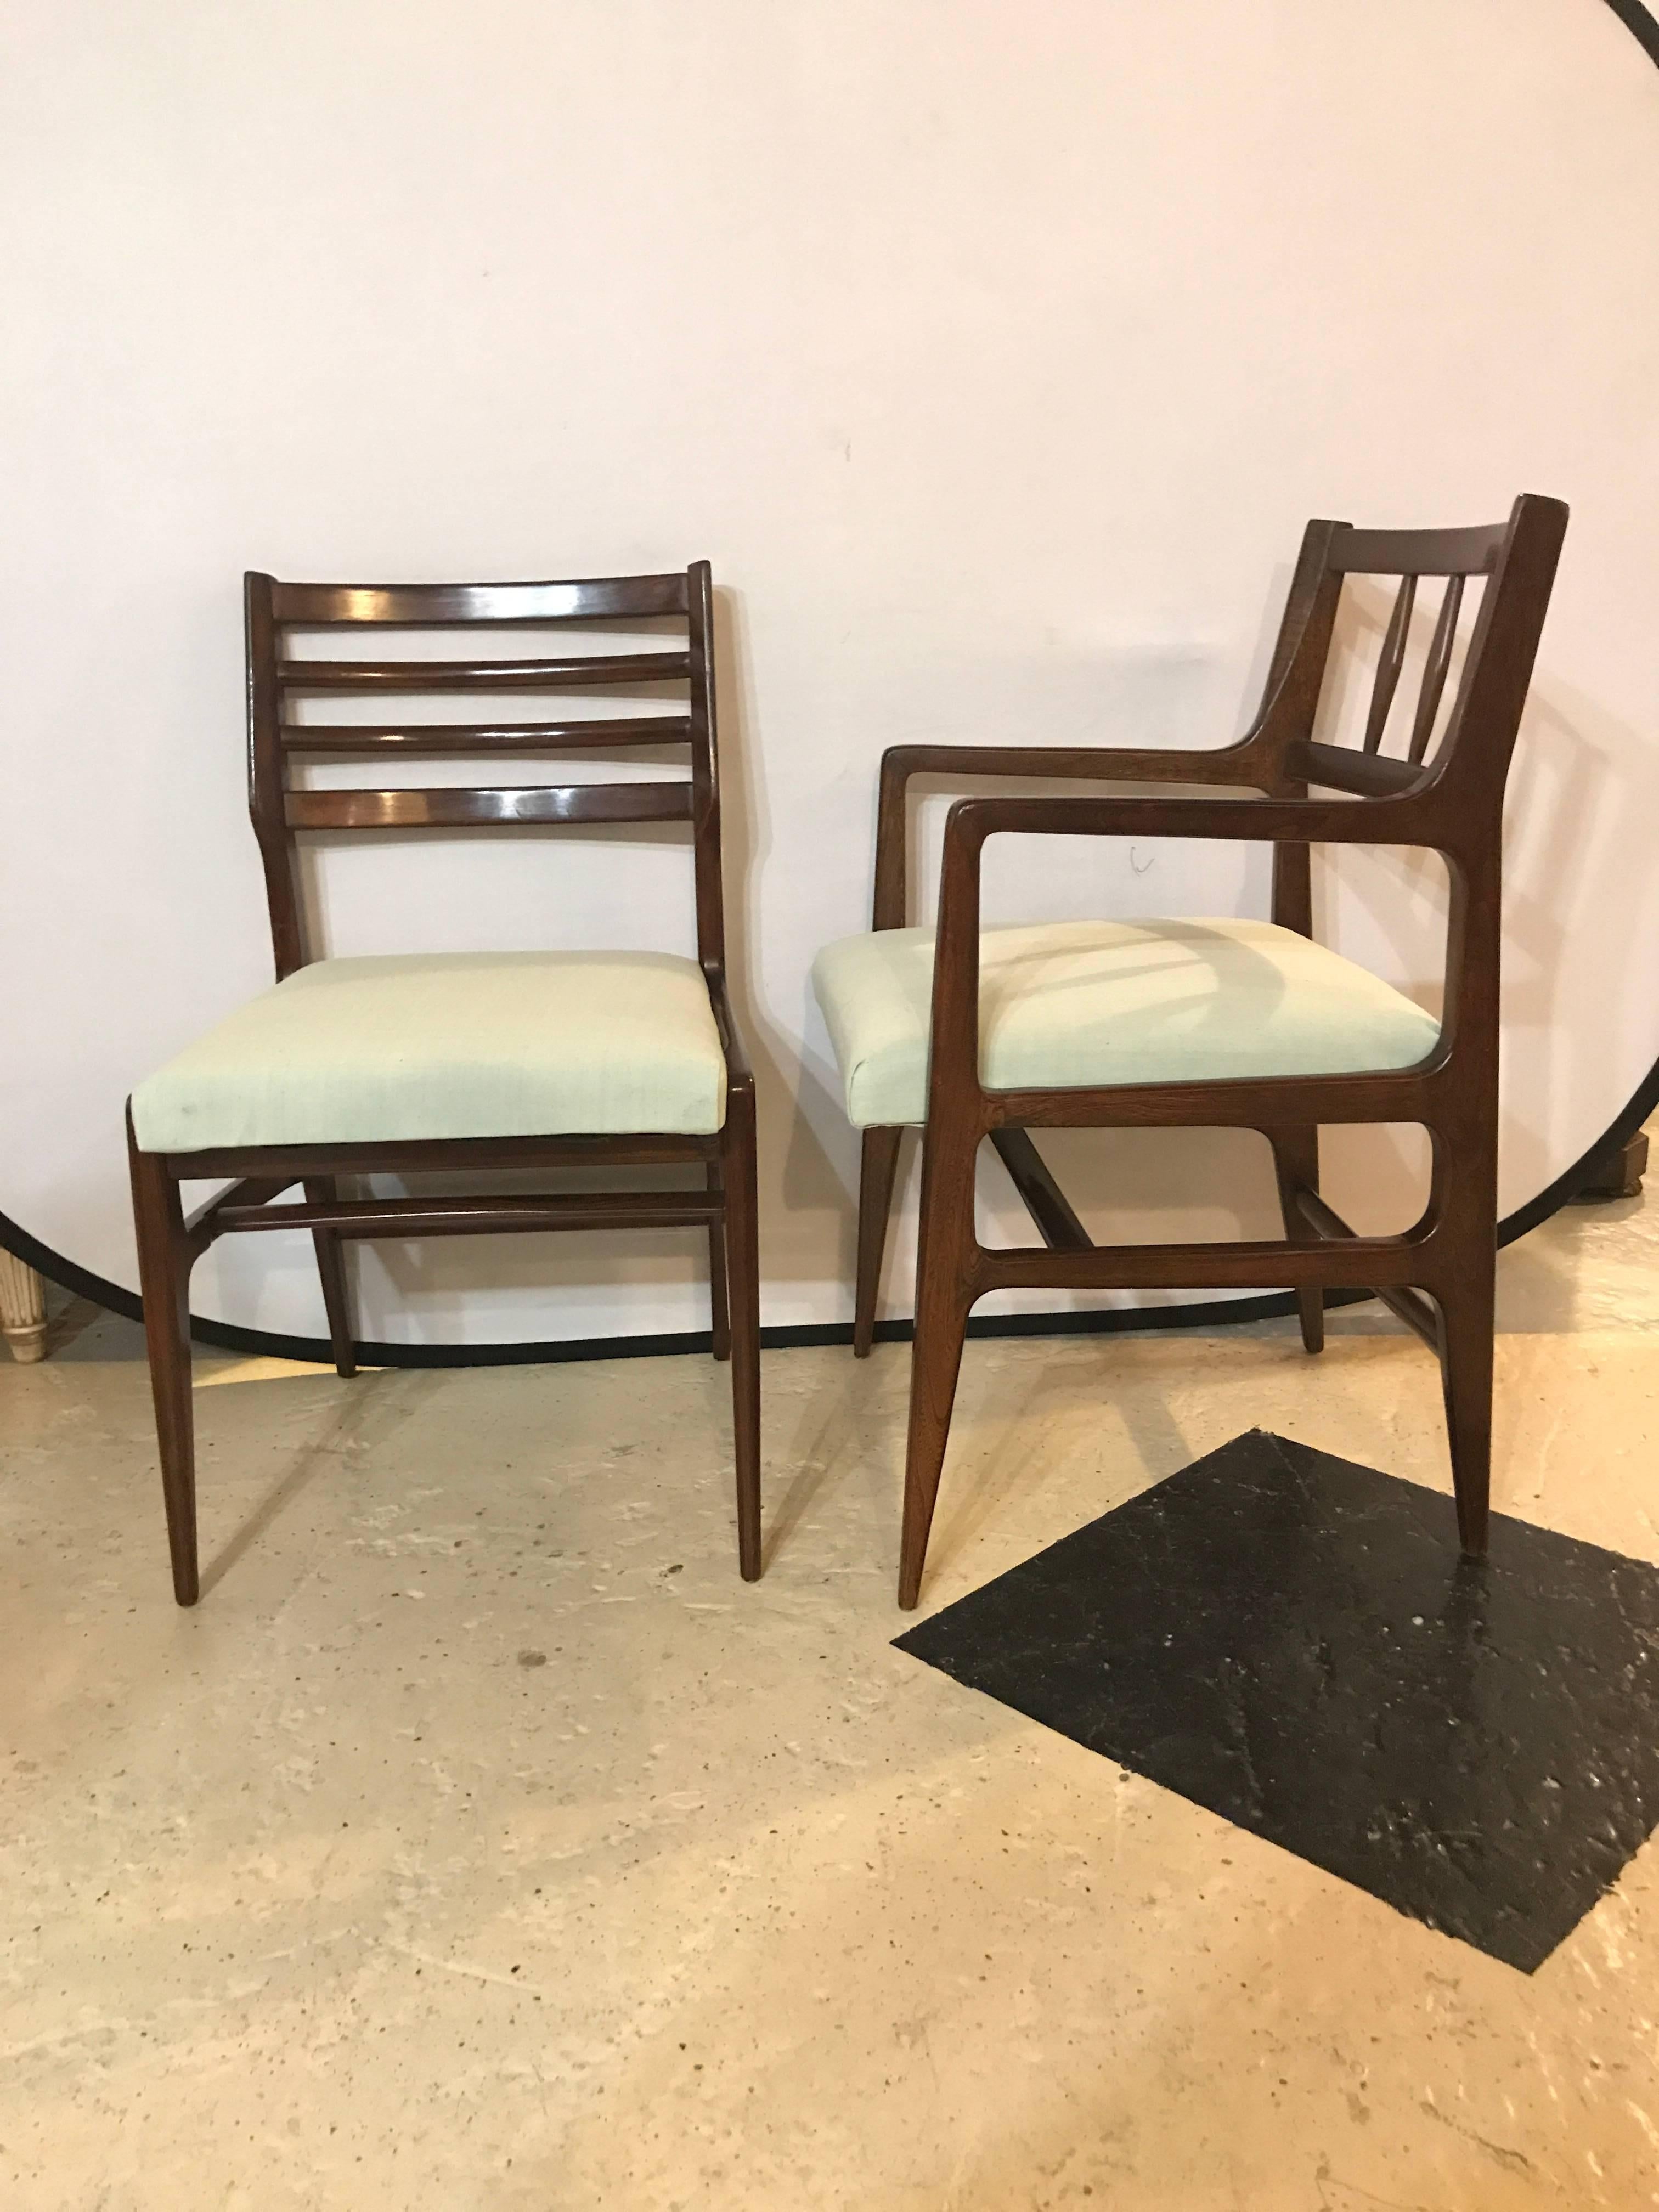 Set of six (two arm four side) dining chairs by R'way furniture in a rosewood finish. This fine set of Mid-Century Modern Dining chairs have been recently recovered in a greenish linen fabric. The sleek and subtle lines define the Mid-Century Modern